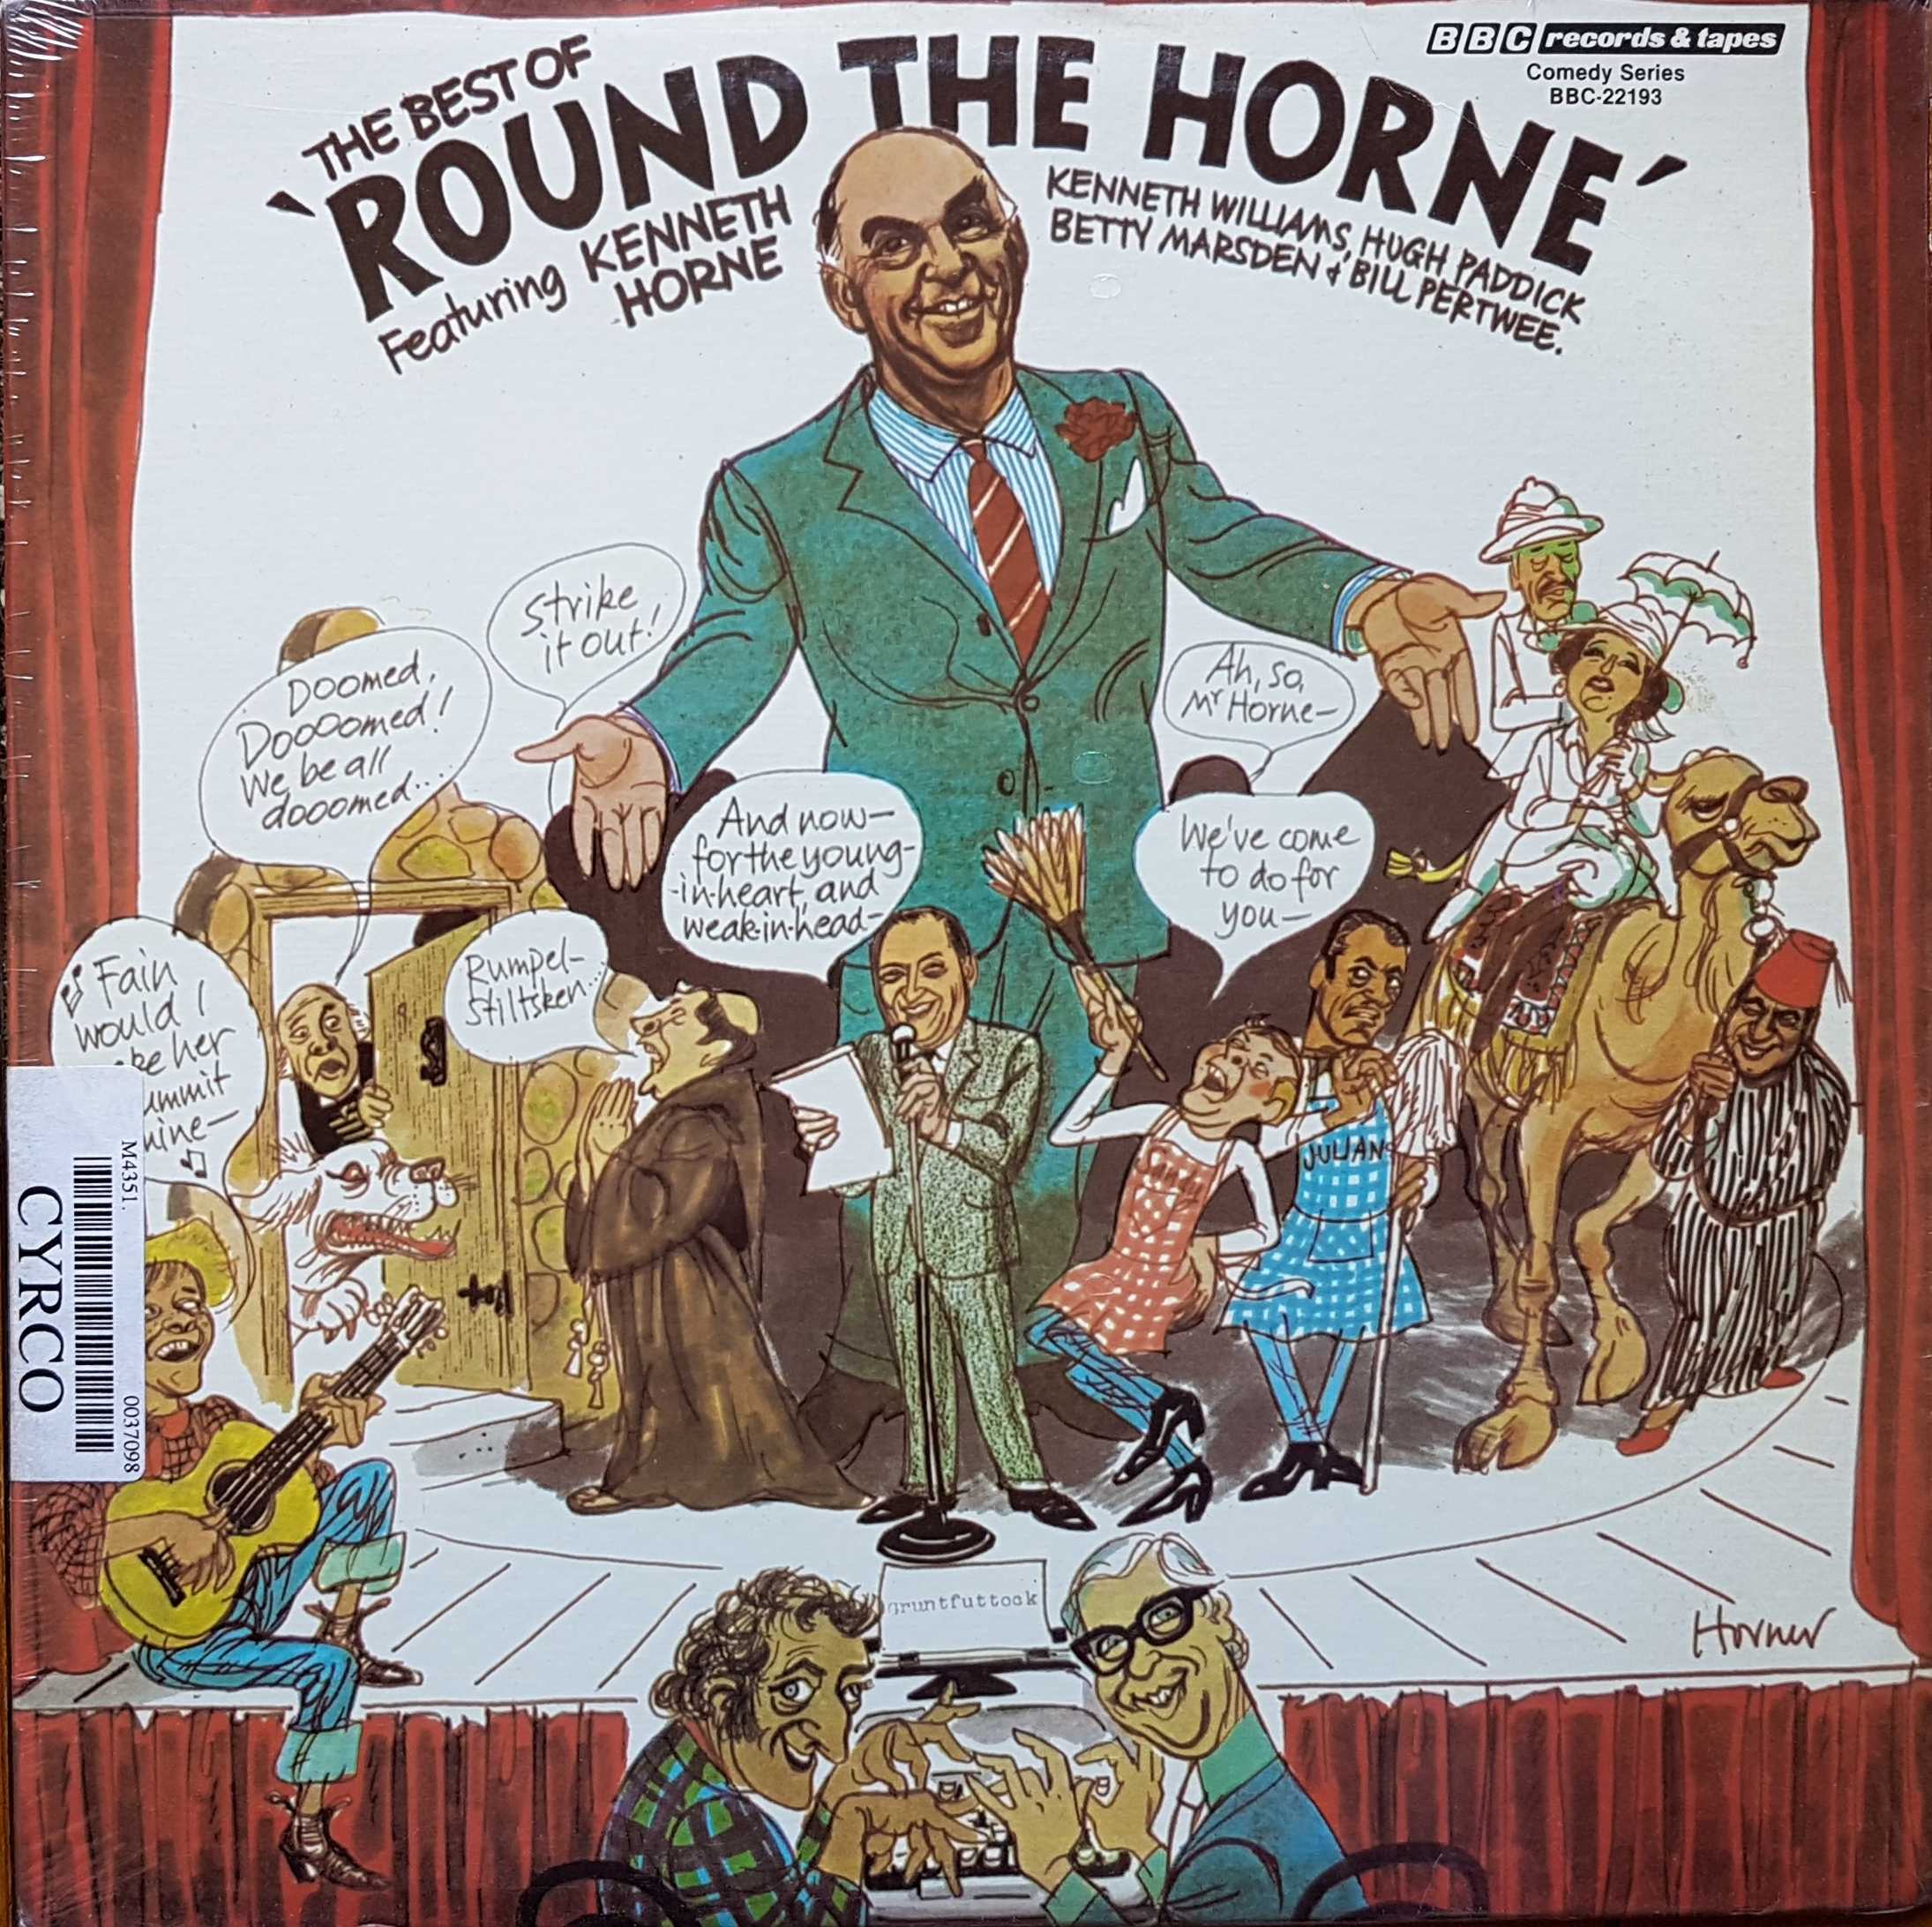 Picture of BBC - 22193 The best of round the Horne by artist Barry Took / Marty Feldman from the BBC albums - Records and Tapes library